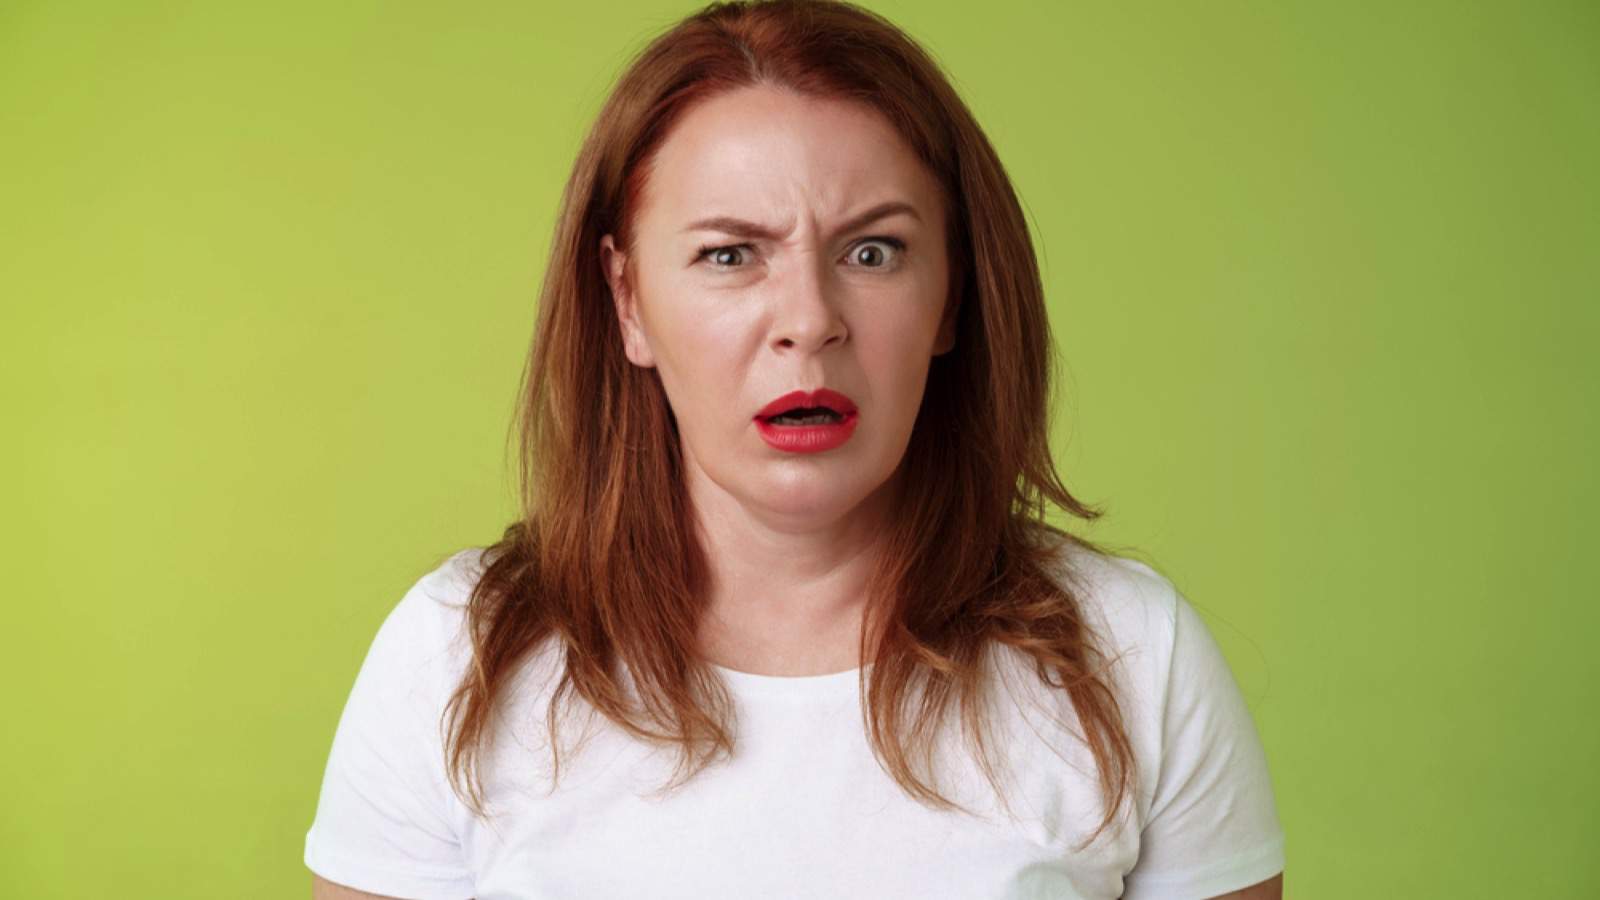 Confused shocked gasping middle-aged woman